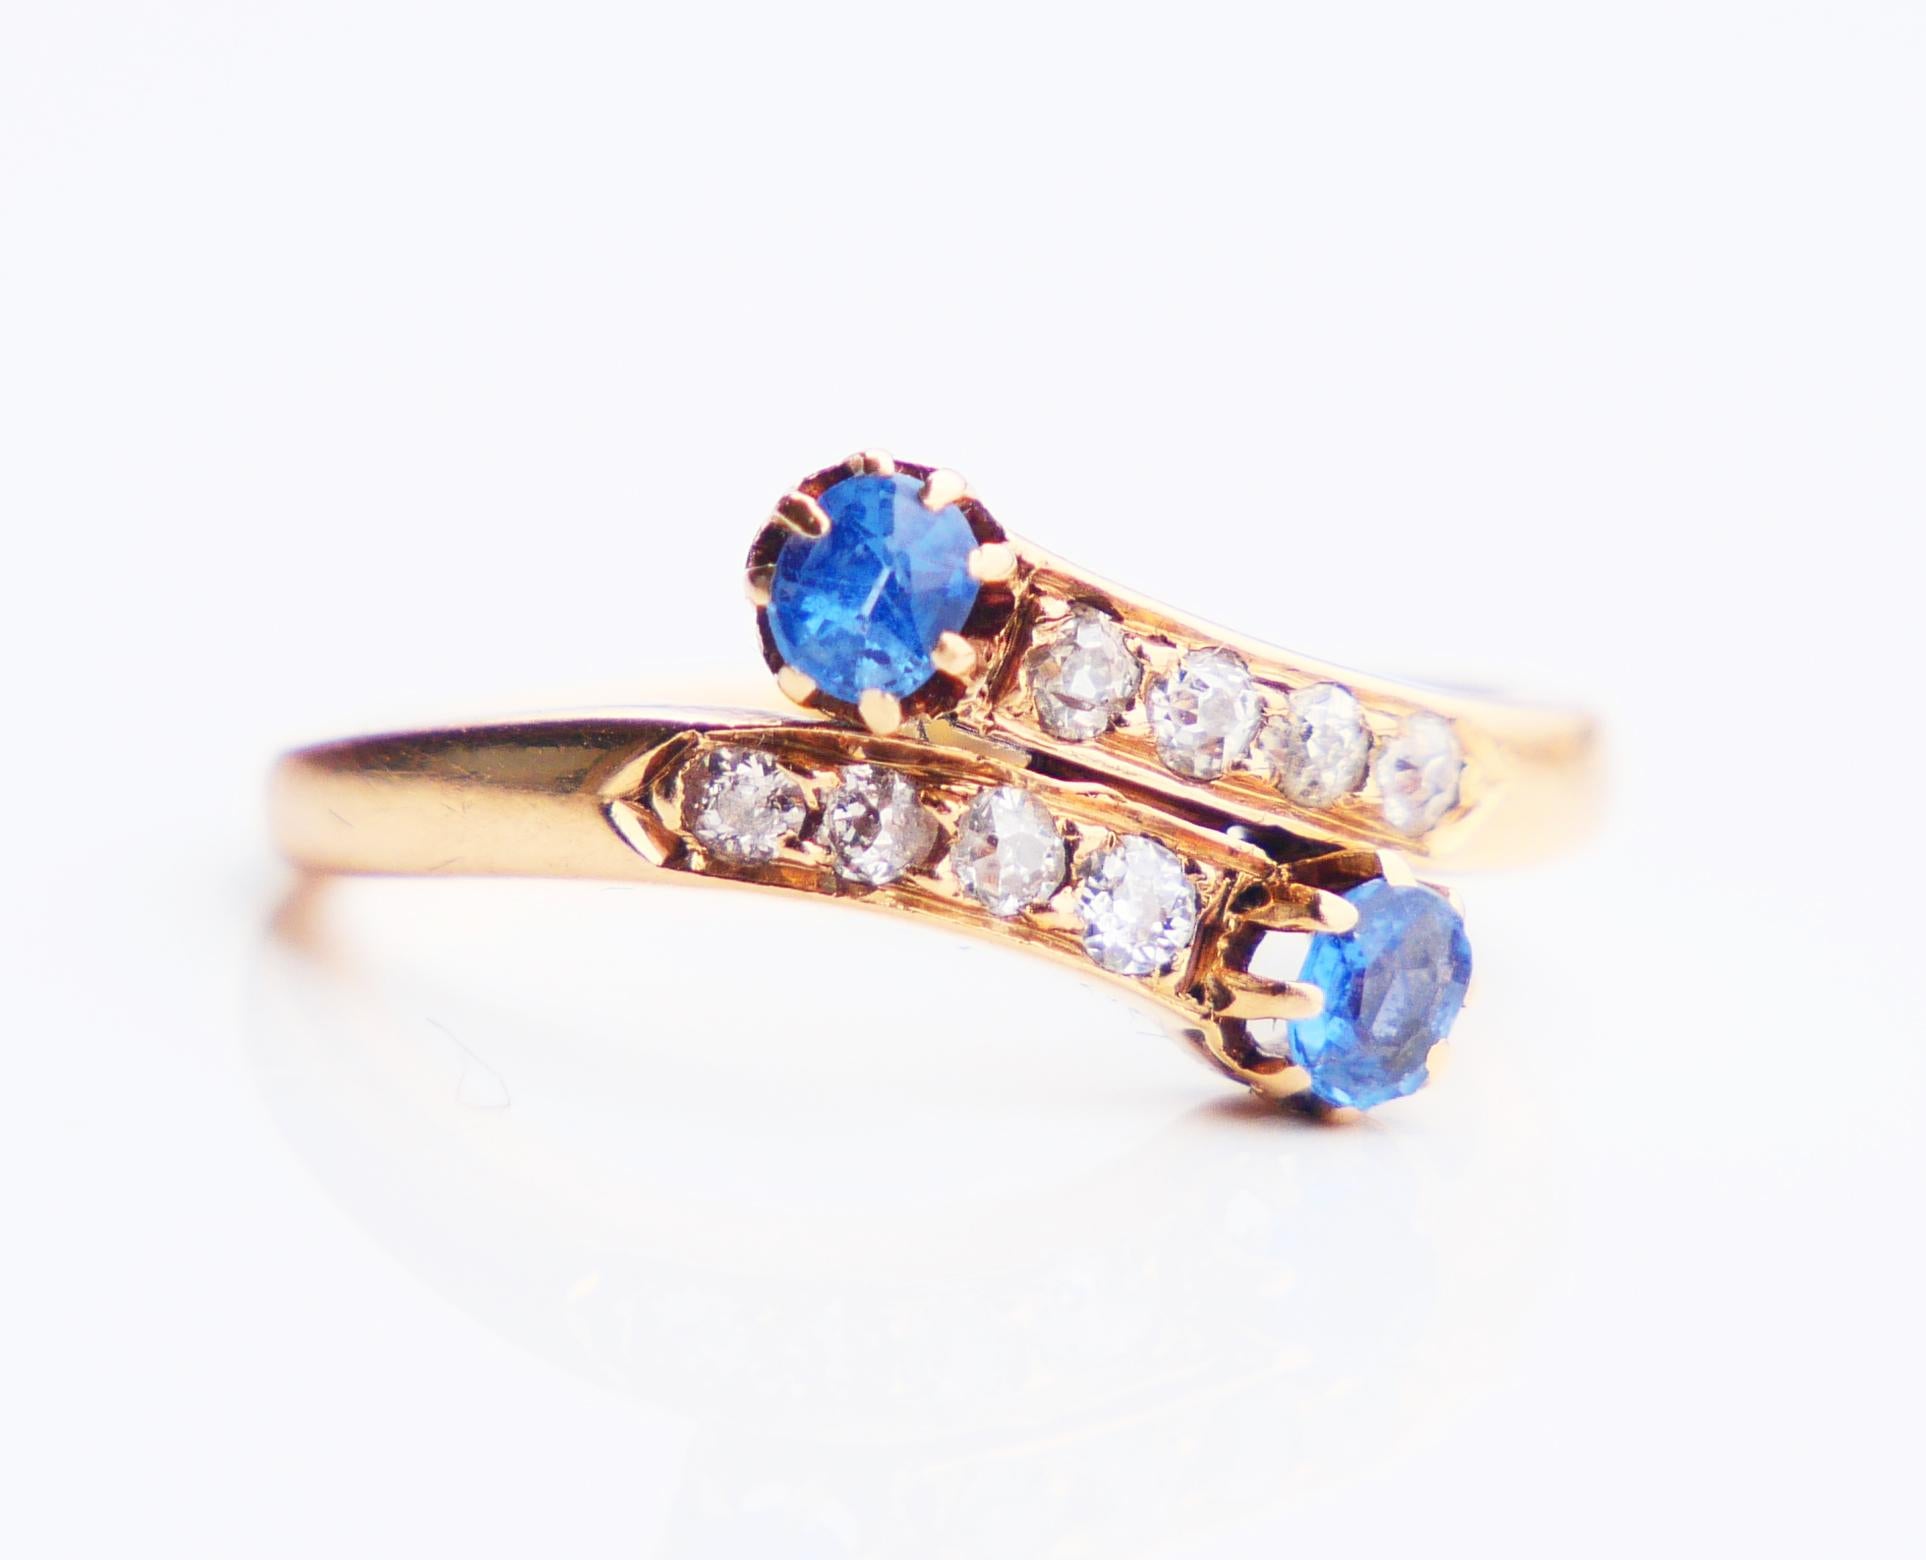 Art Nouveau period Swedish Toi et Moi Ring featuring solid 18K Yellow Gold twisted frame with claw set two old oval cut natural Ceylon Sapphires of Cornflower /Light Blue color 3 mm x 2.25 mm x 1.75 mm deep/ca.0.3ct each accented with eight pave set